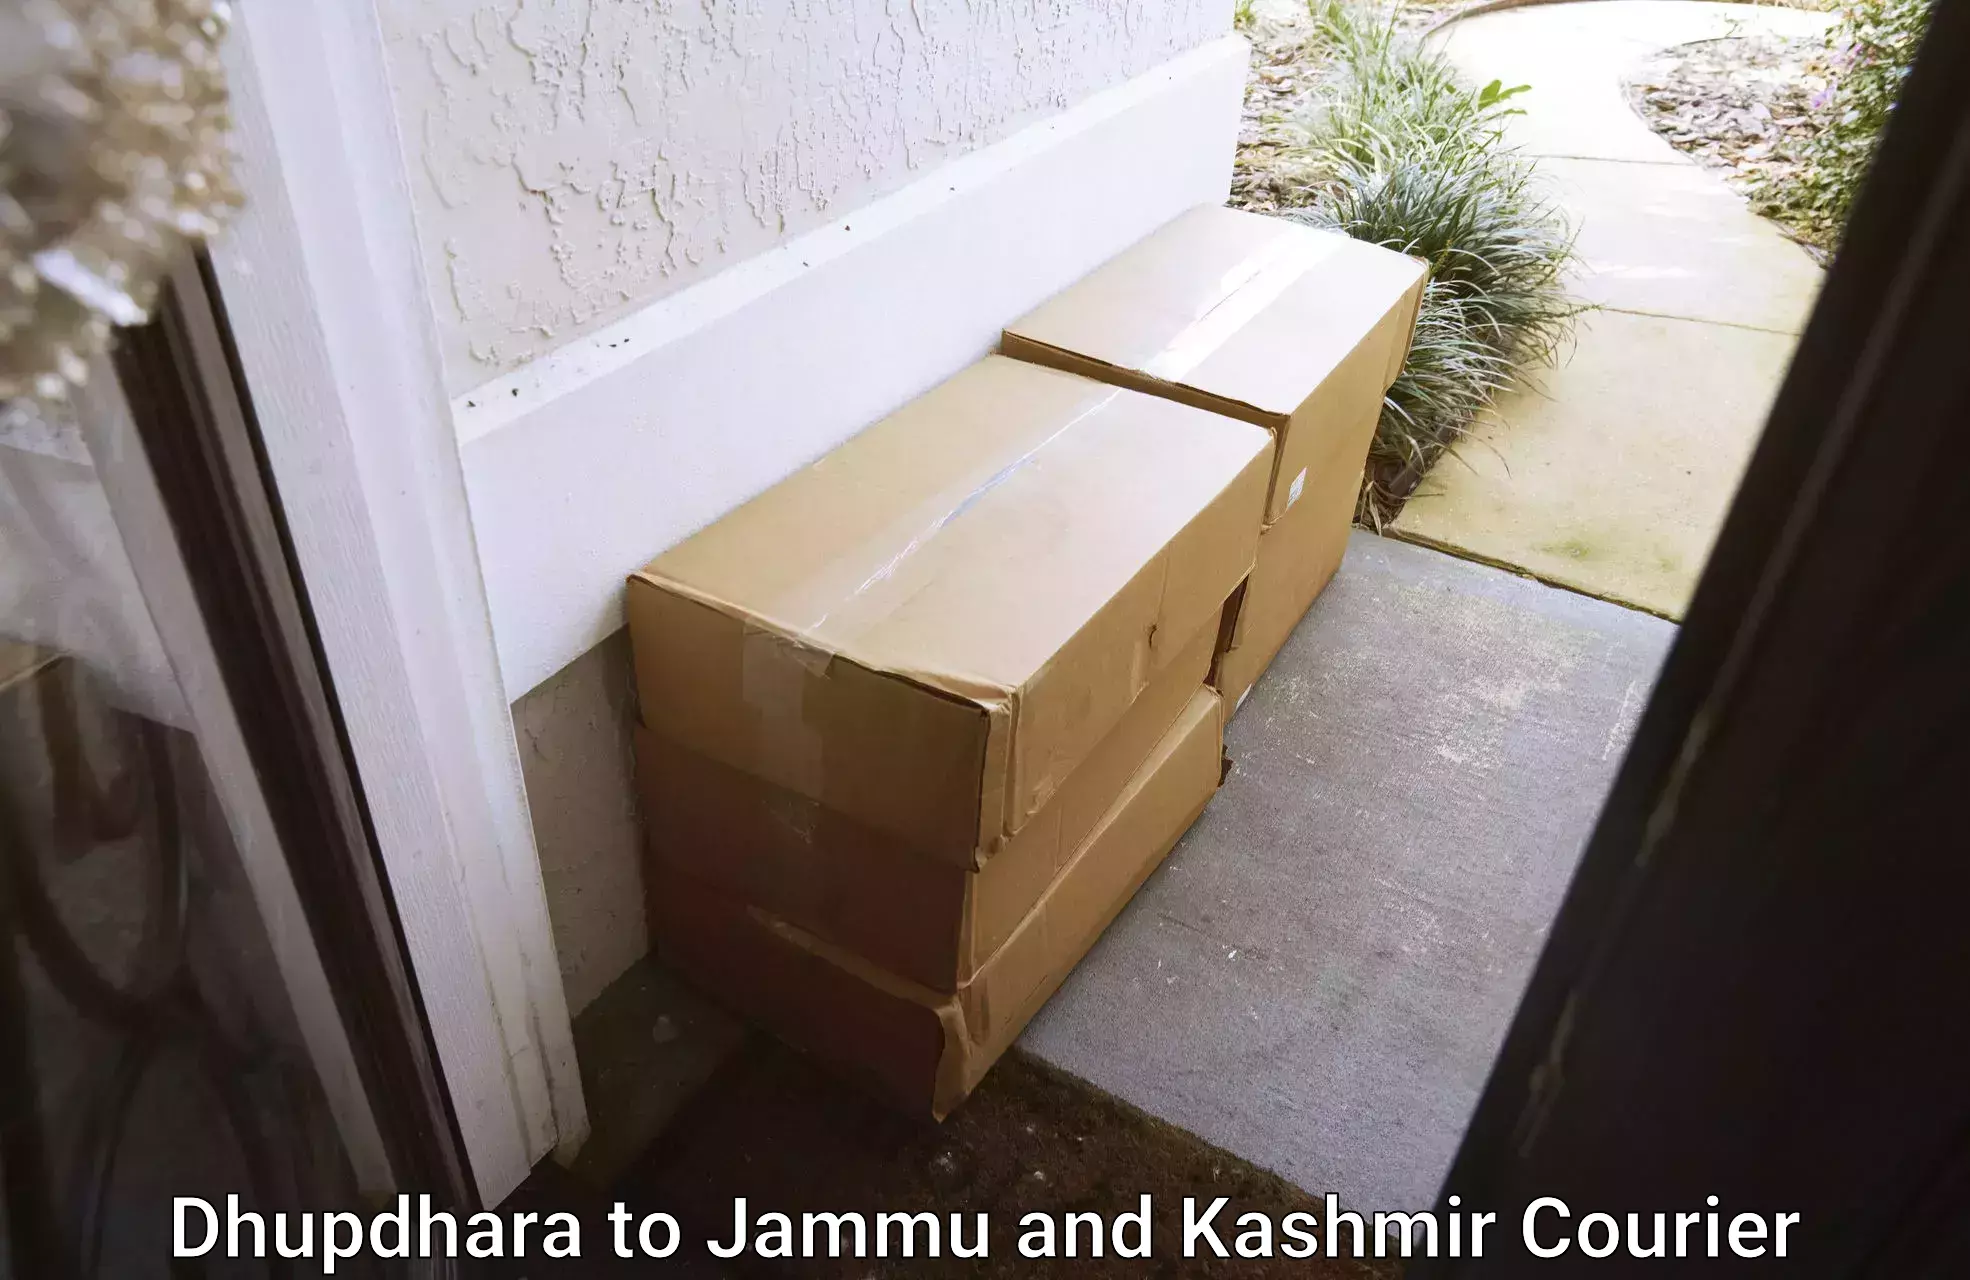 Efficient parcel service in Dhupdhara to Baramulla